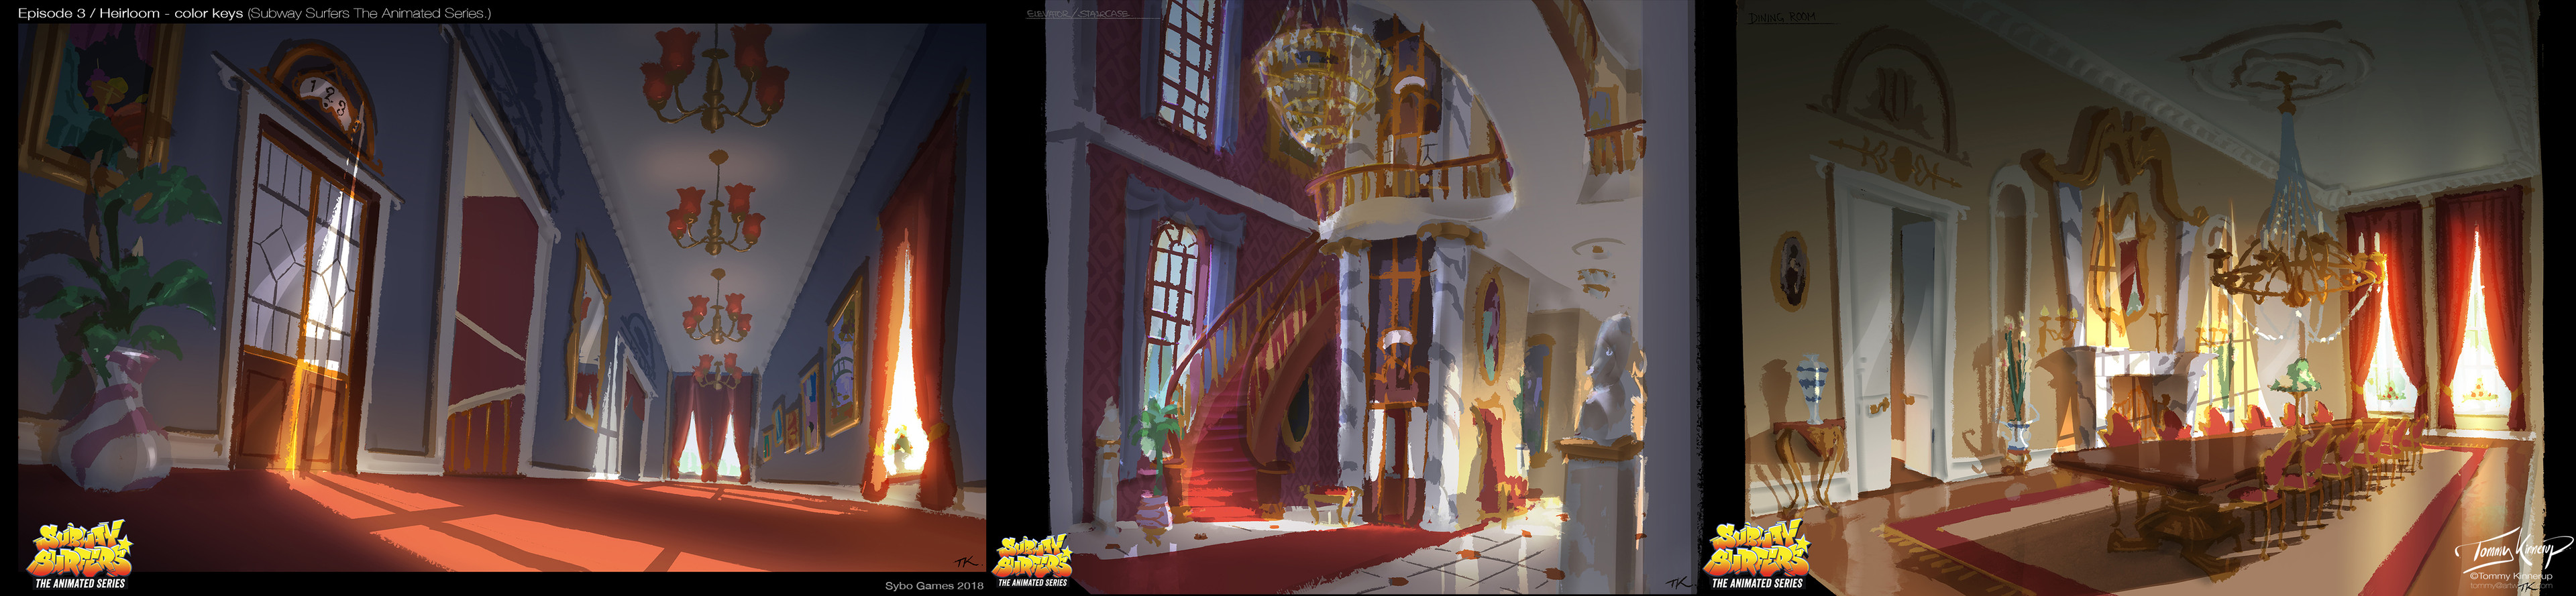 Int. Mansion. Hallway, staircase, dining room.